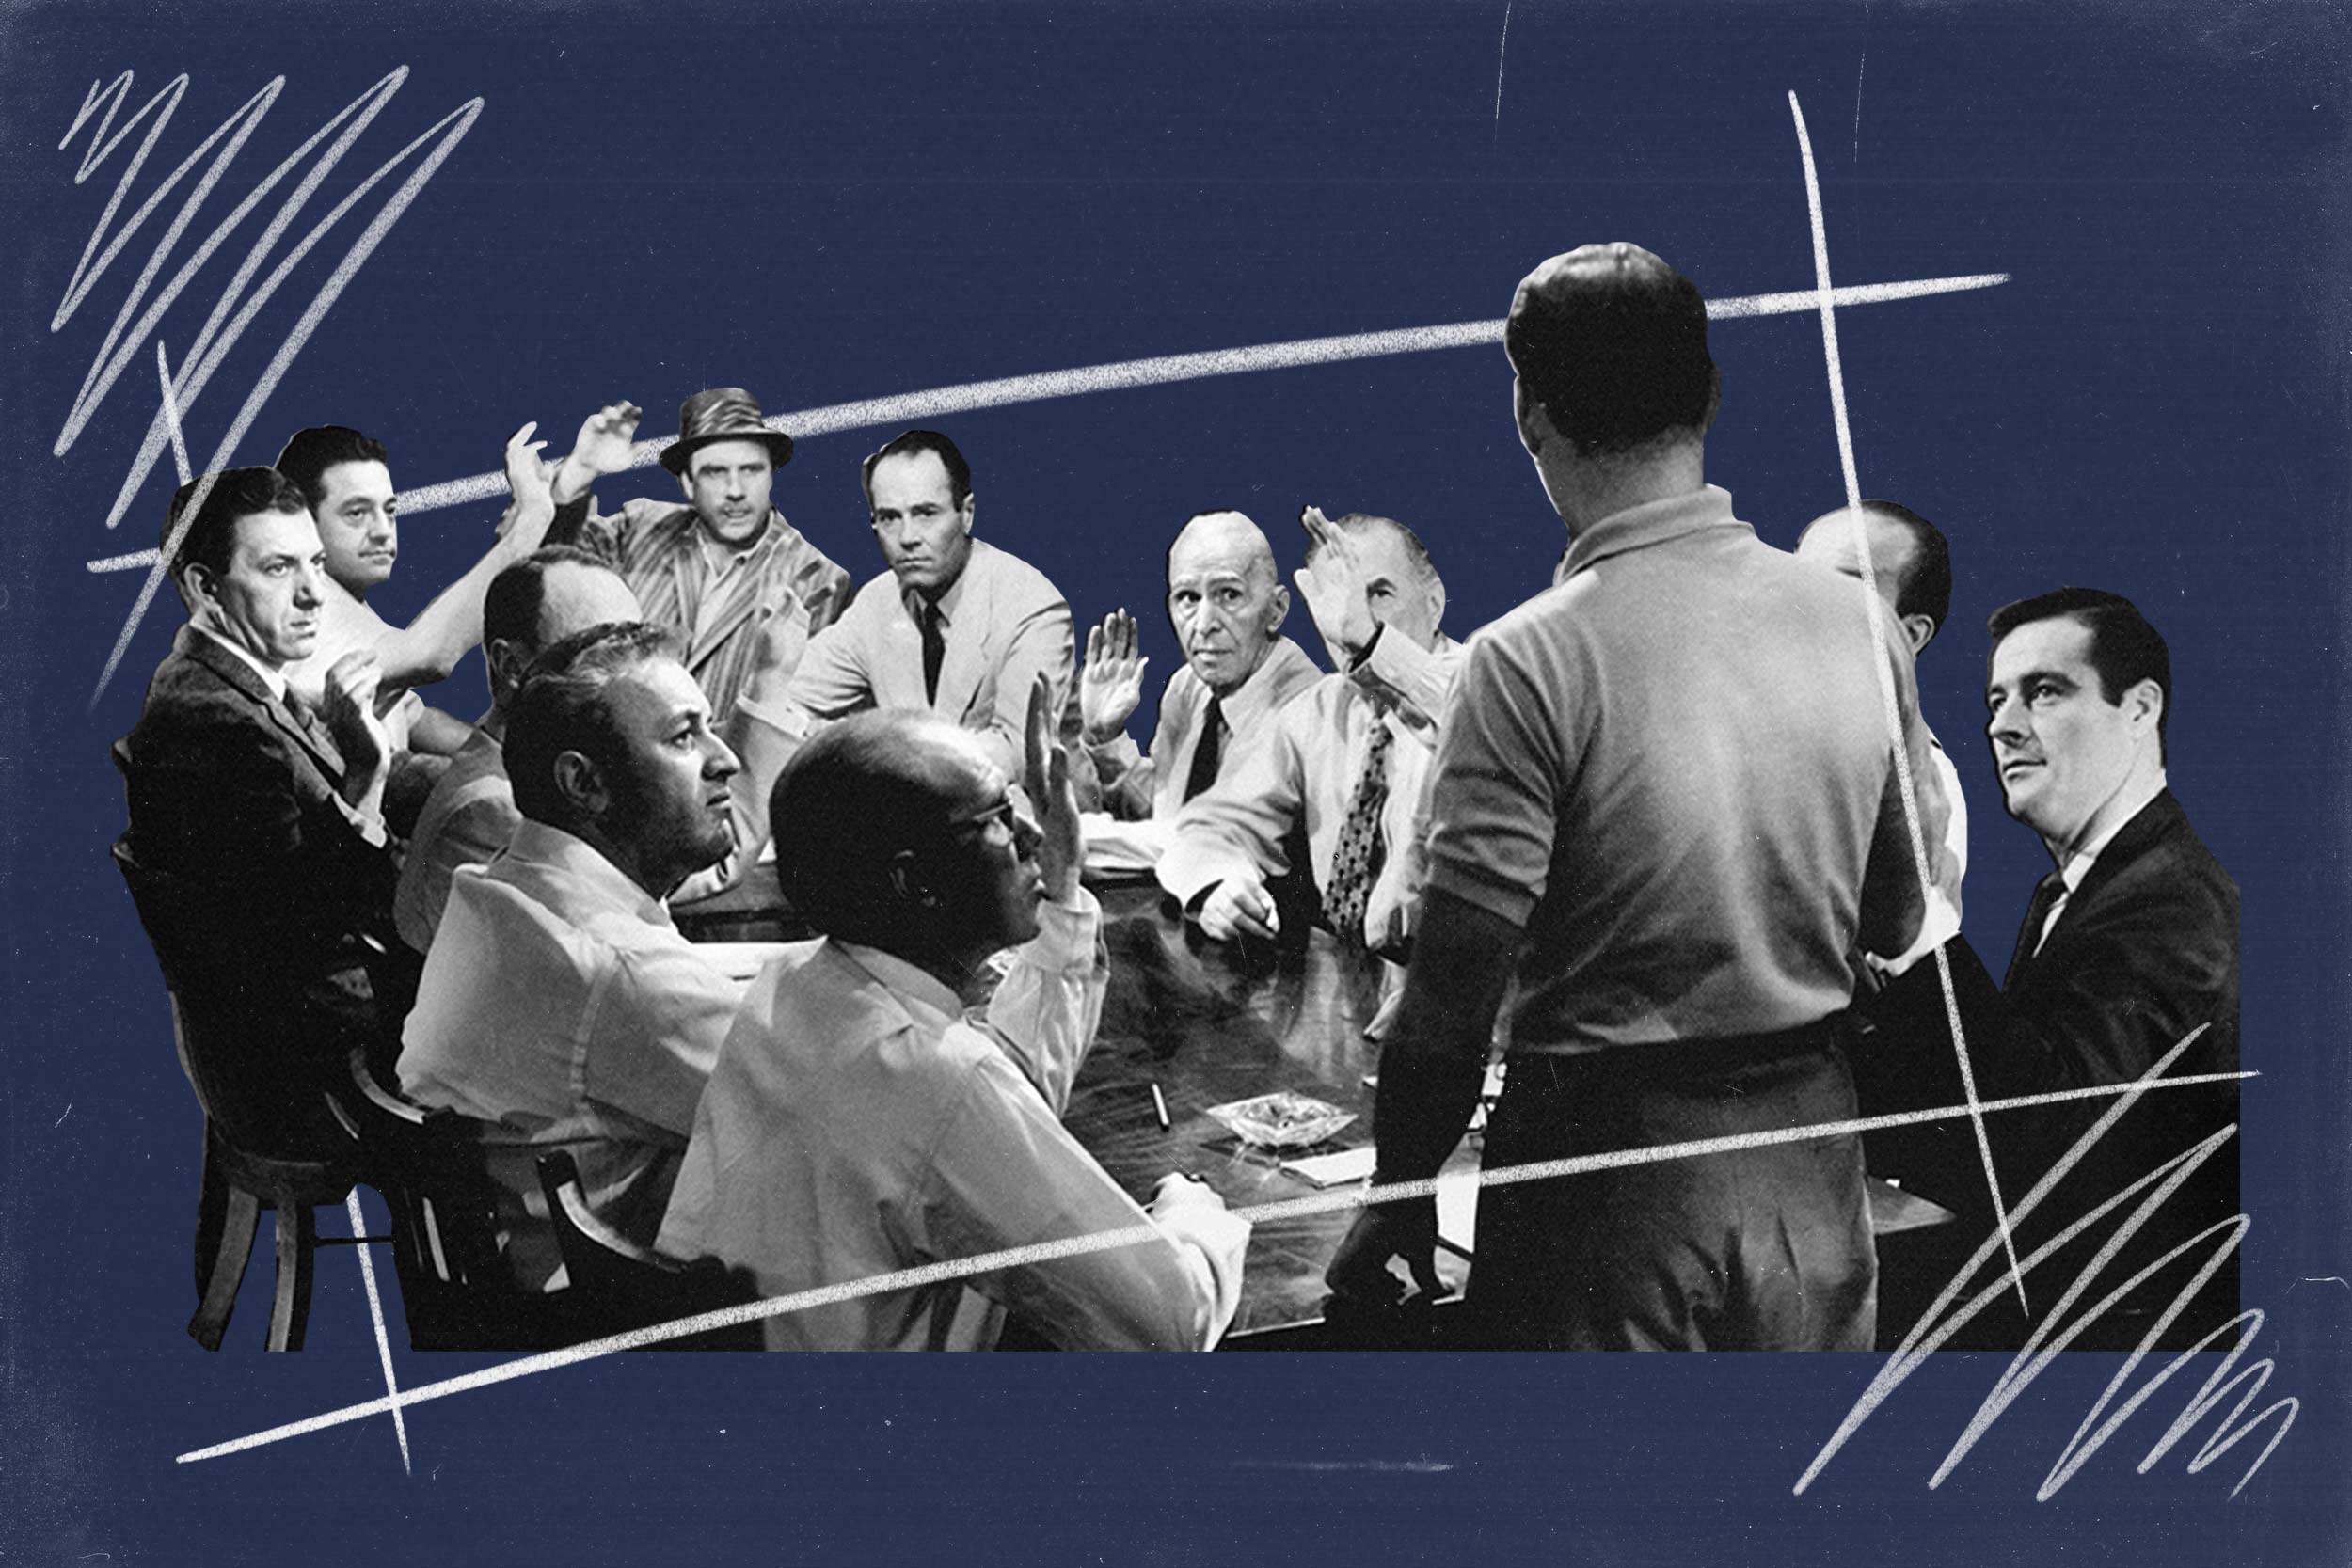 An illustration against a blue background featuring a black-and-white still from the film "12 Angry Men." The men sit around a table, some raising their hands. 